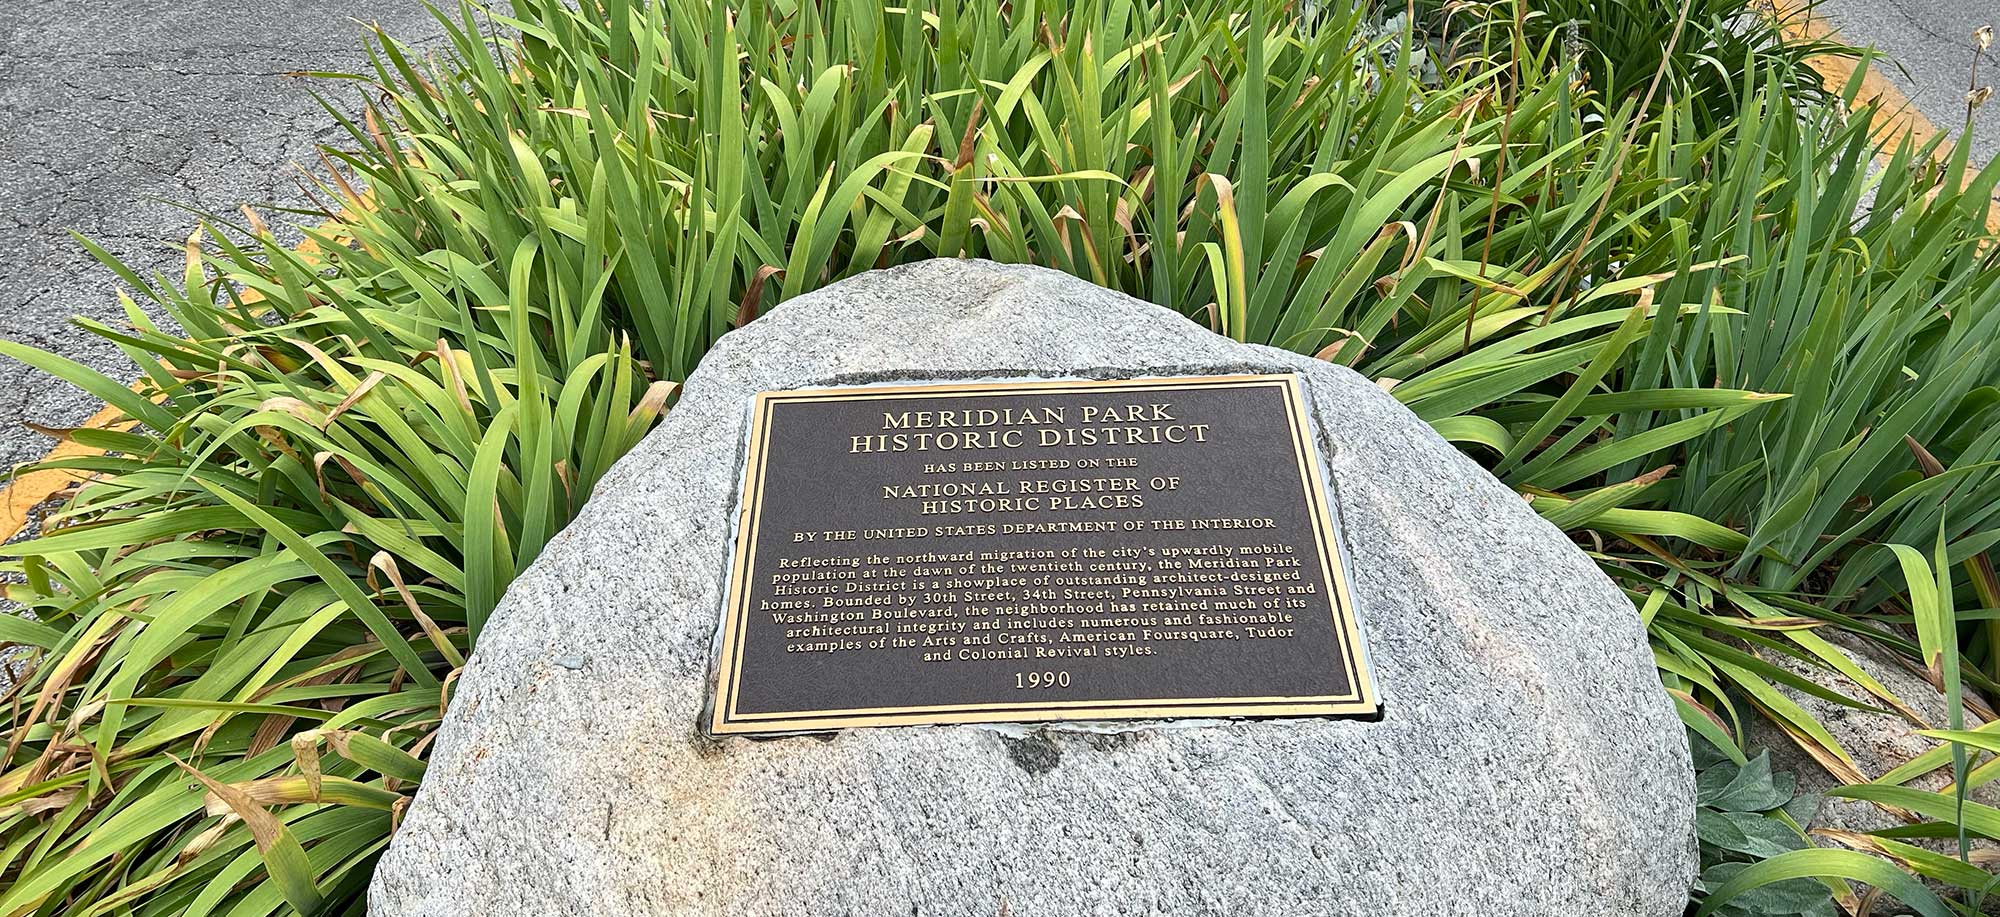 A plaque designating Meridian Park Historic District on the National Register of Historic Places